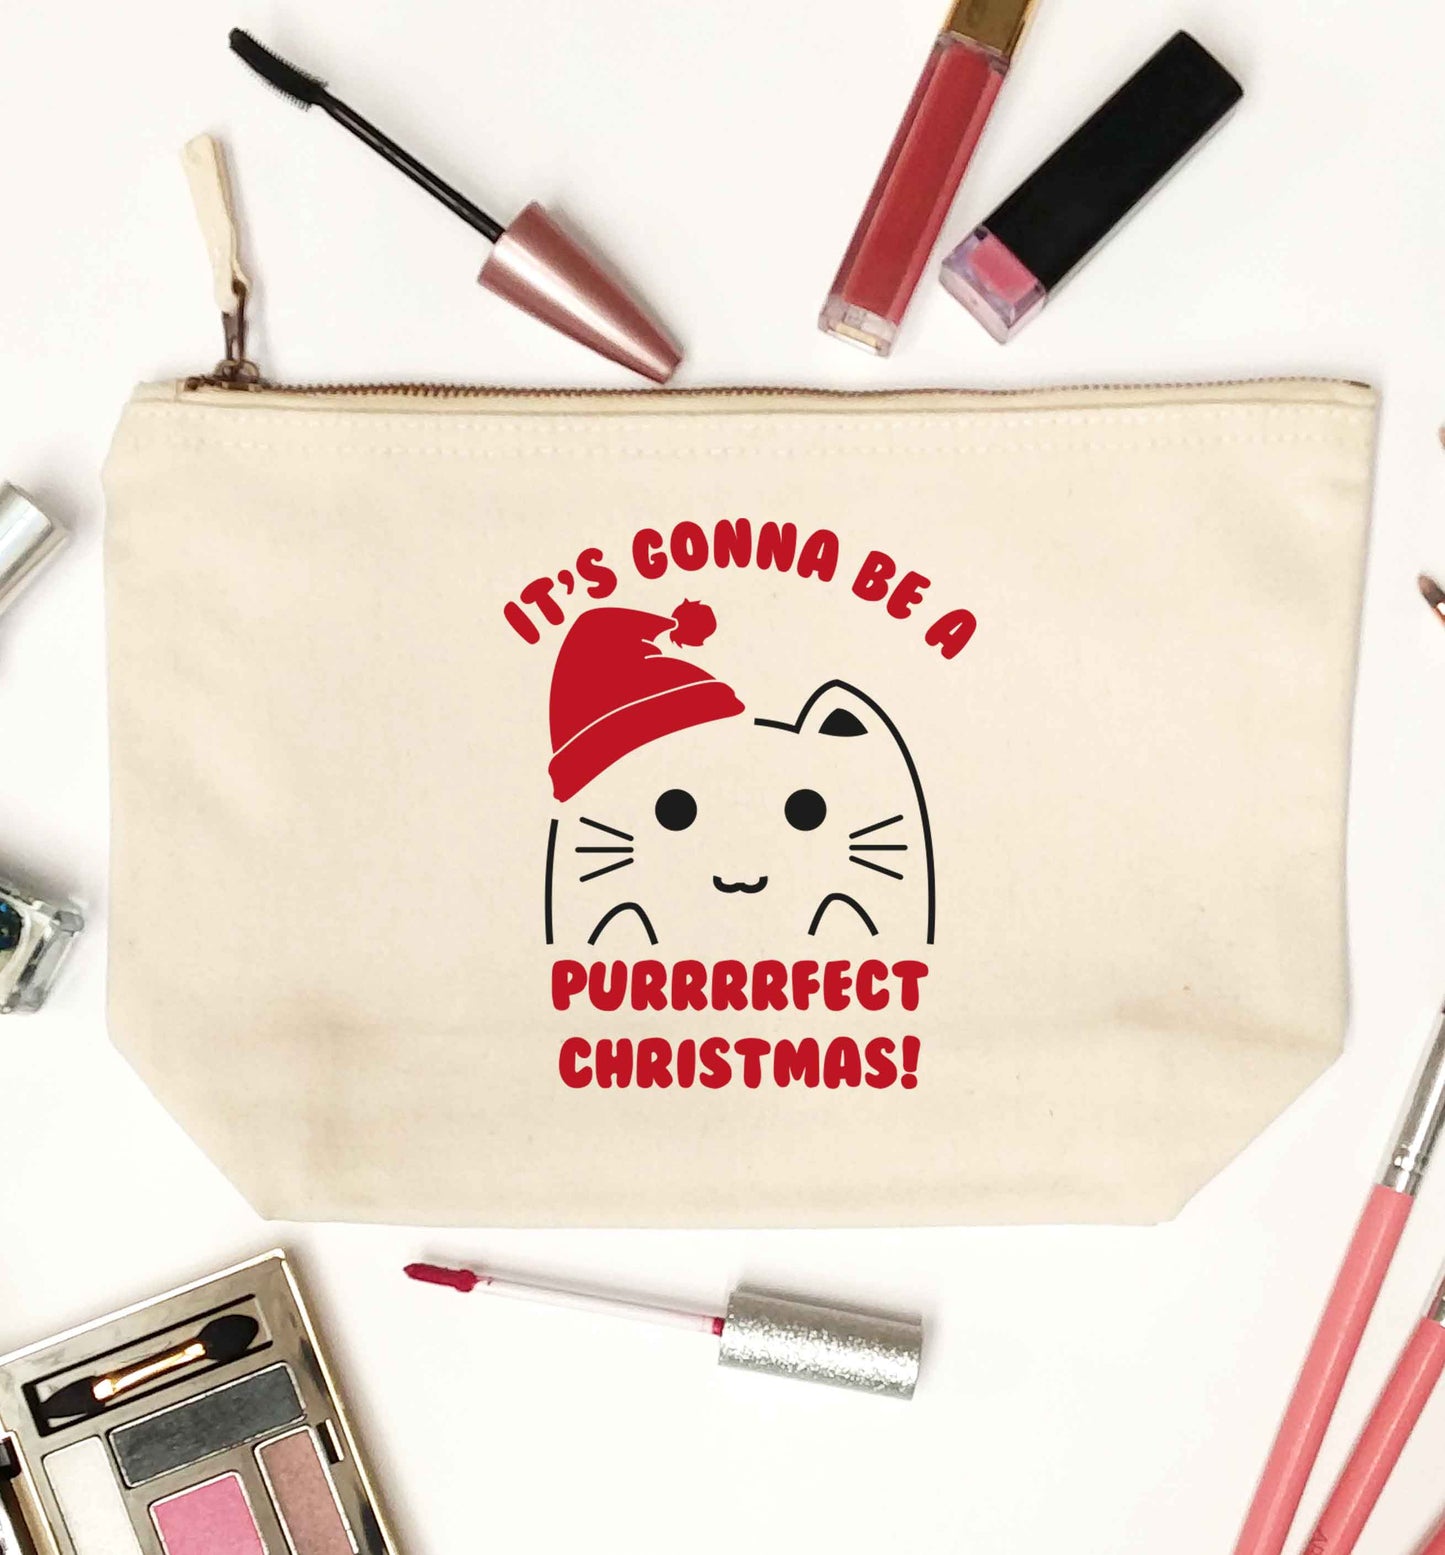 It's going to be a purrfect Christmas natural makeup bag